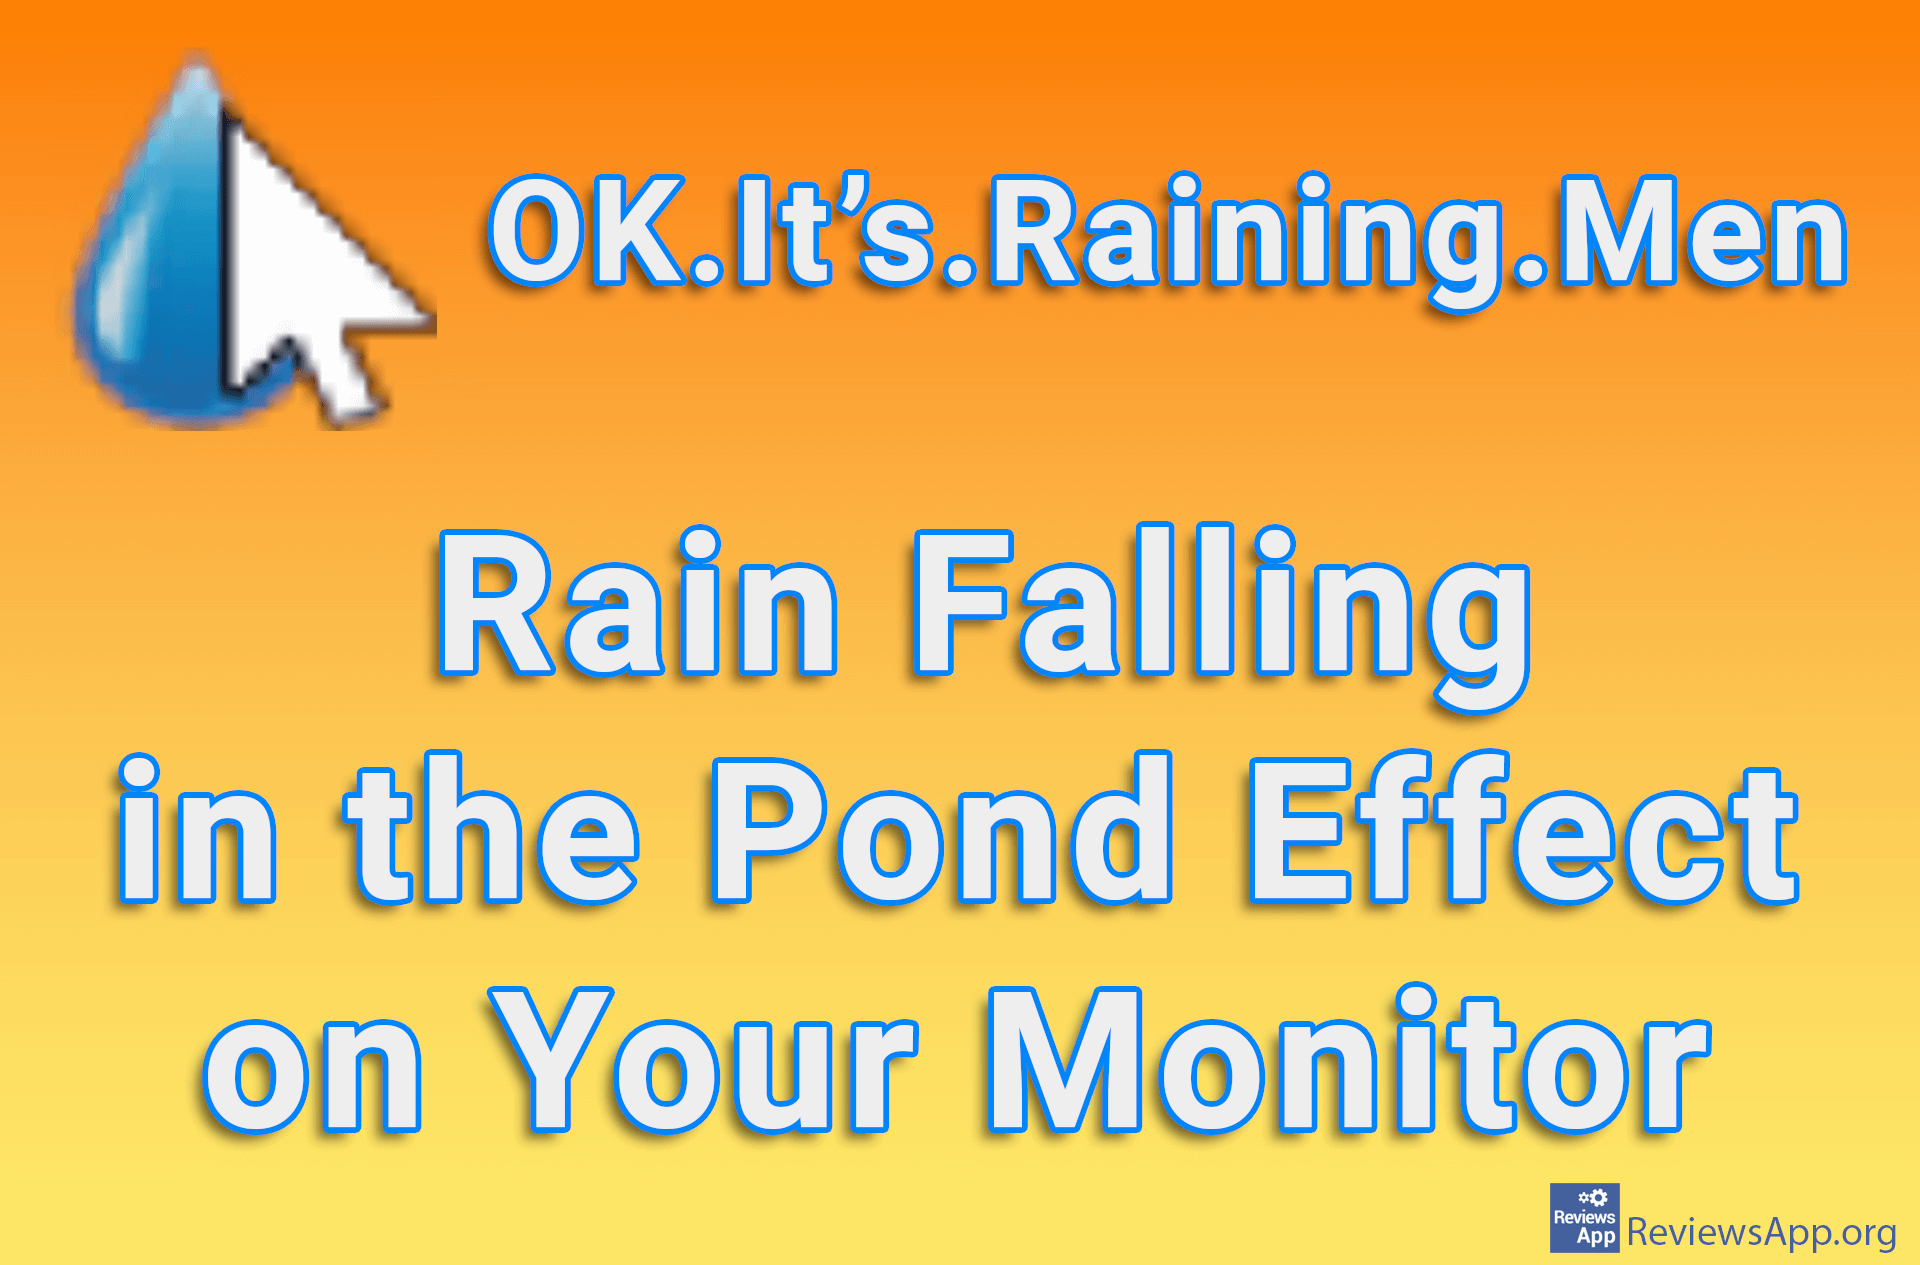 OK.It’s.Raining.Men – Rain Falling in the Pond Effect on Your Monitor